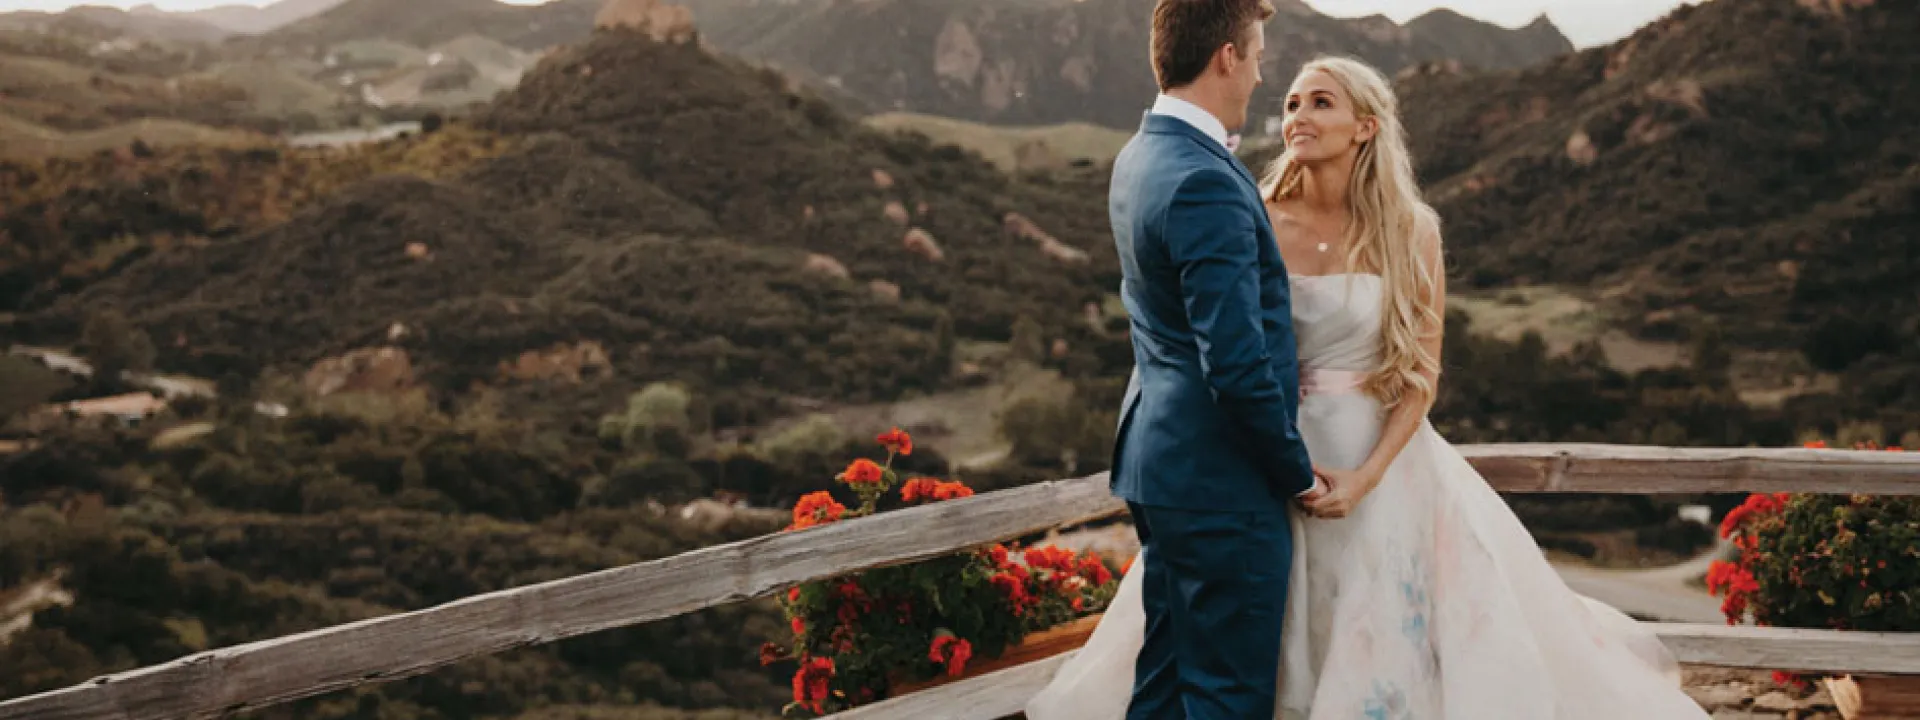 Courtney and Ryan stand overlooking the view at Cielo Farms in Malibu